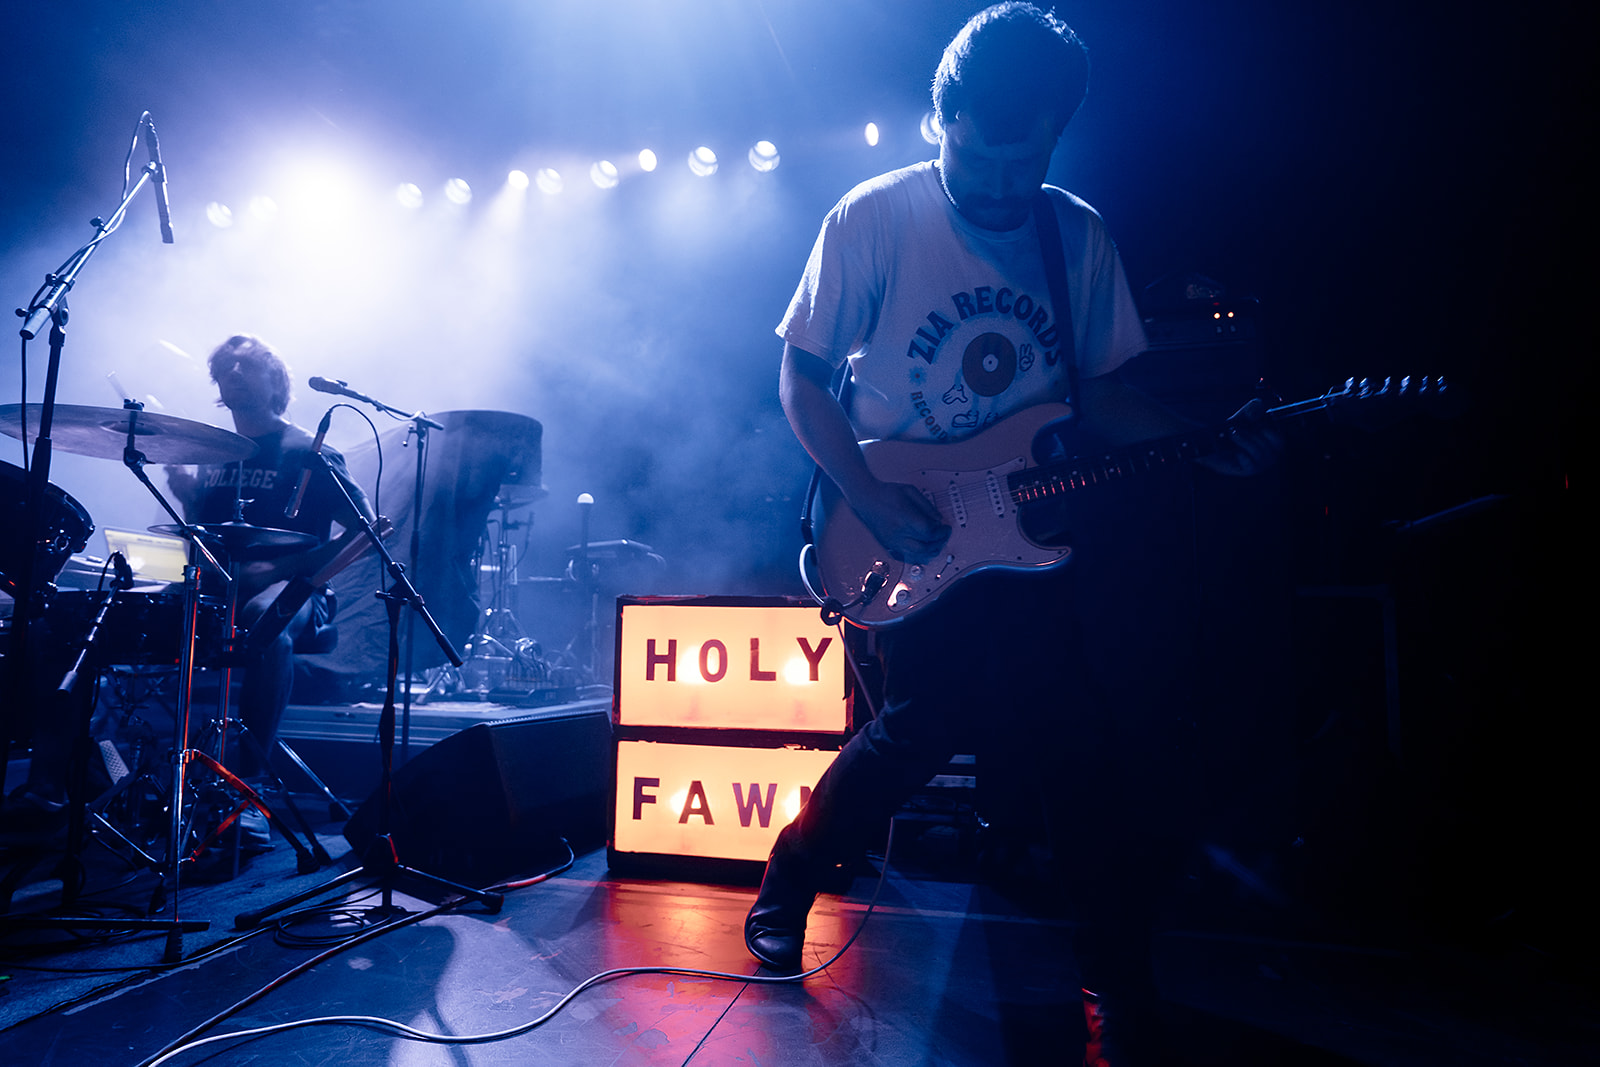 Holy Fawn guitarist opens for Thrice on their Artists and The Ambulance 20th Anniversary tour at the Showbox in WA